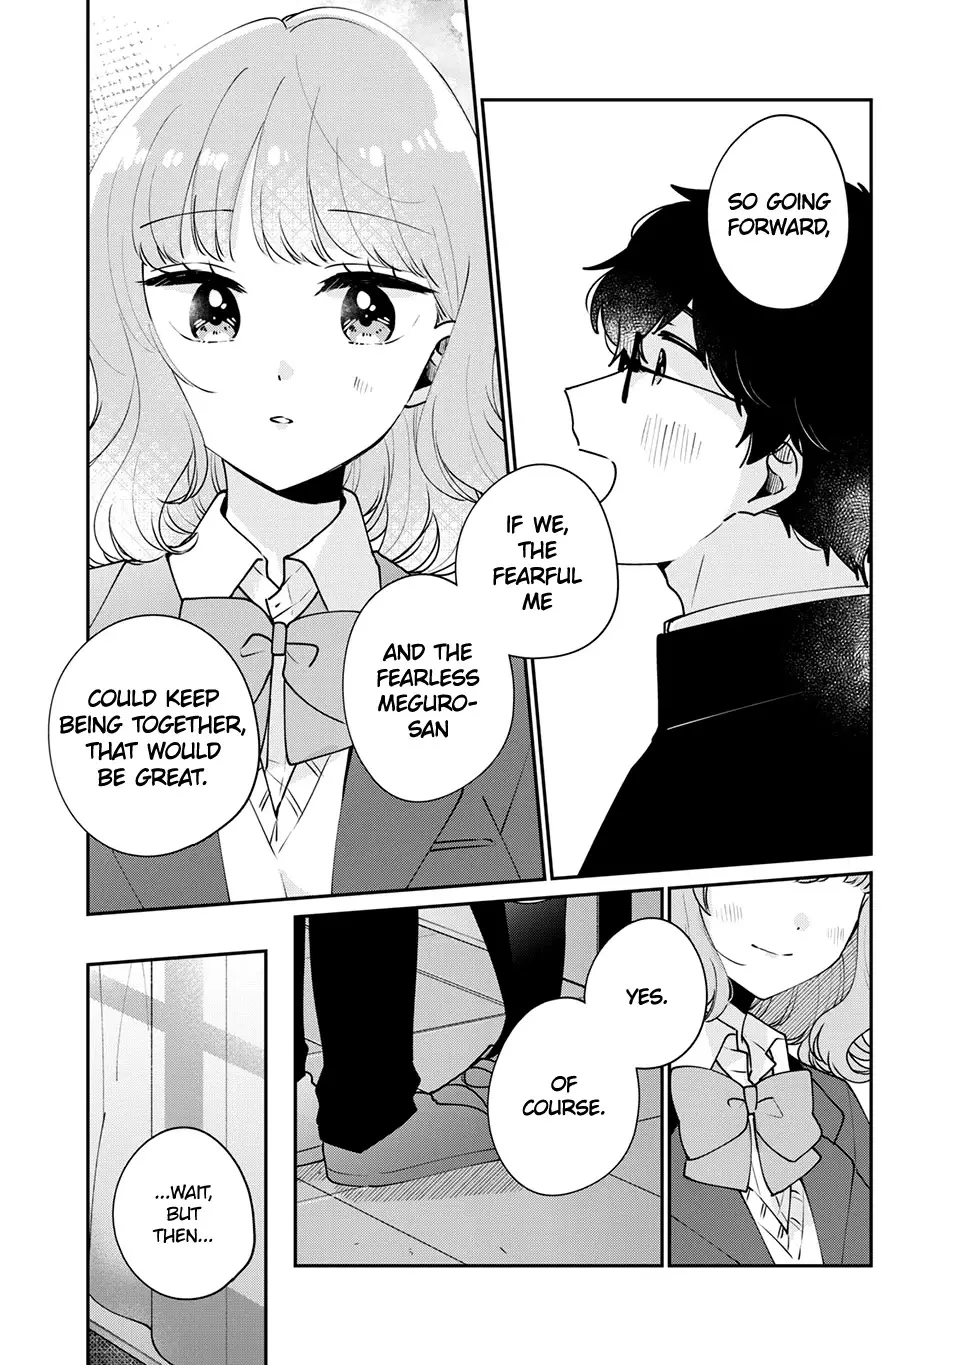 It's Not Meguro-San's First Time - 46 page 12